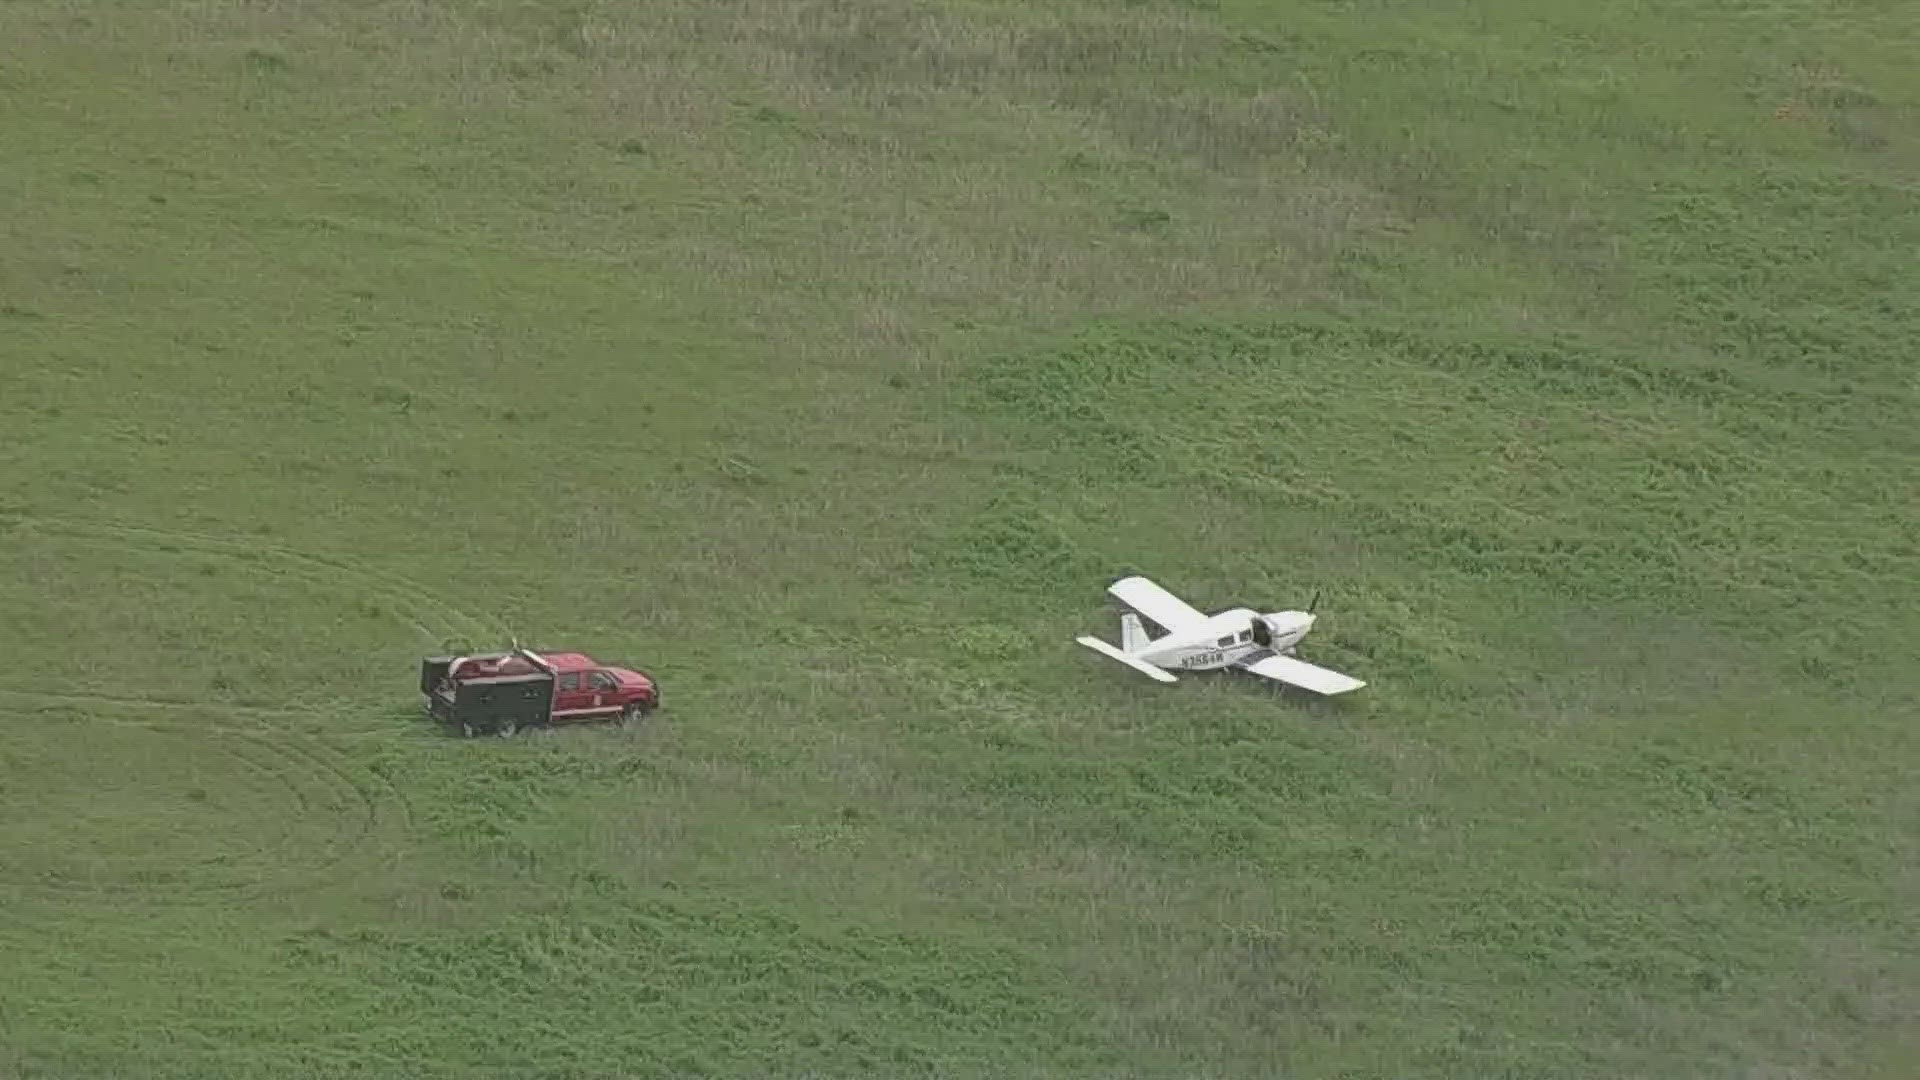 The Denton Fire Department said the crash happened in a field just north of Denton Enterprise Airport.